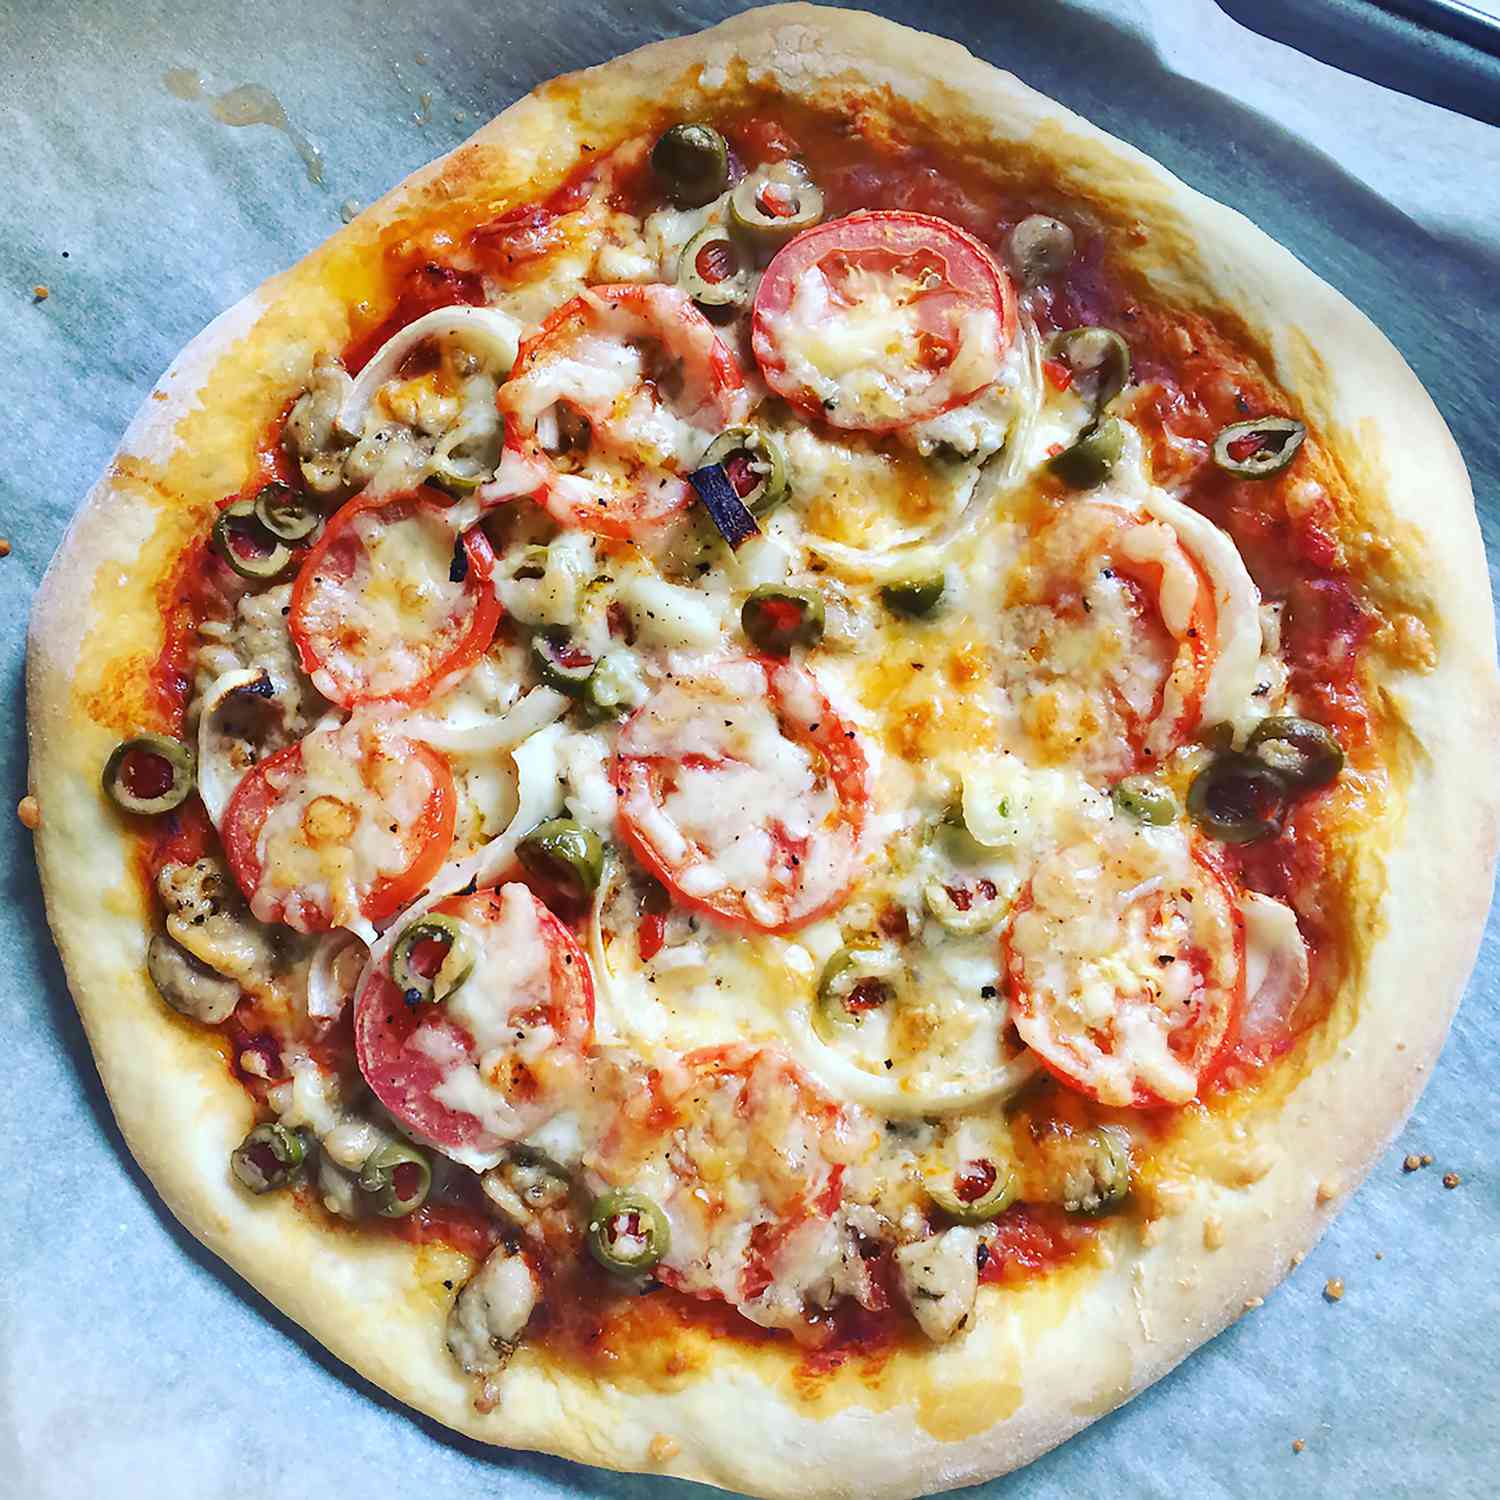 a top down view of a fresh baked homemade pizza topped with tomatoes, olives, onions, and mushrooms